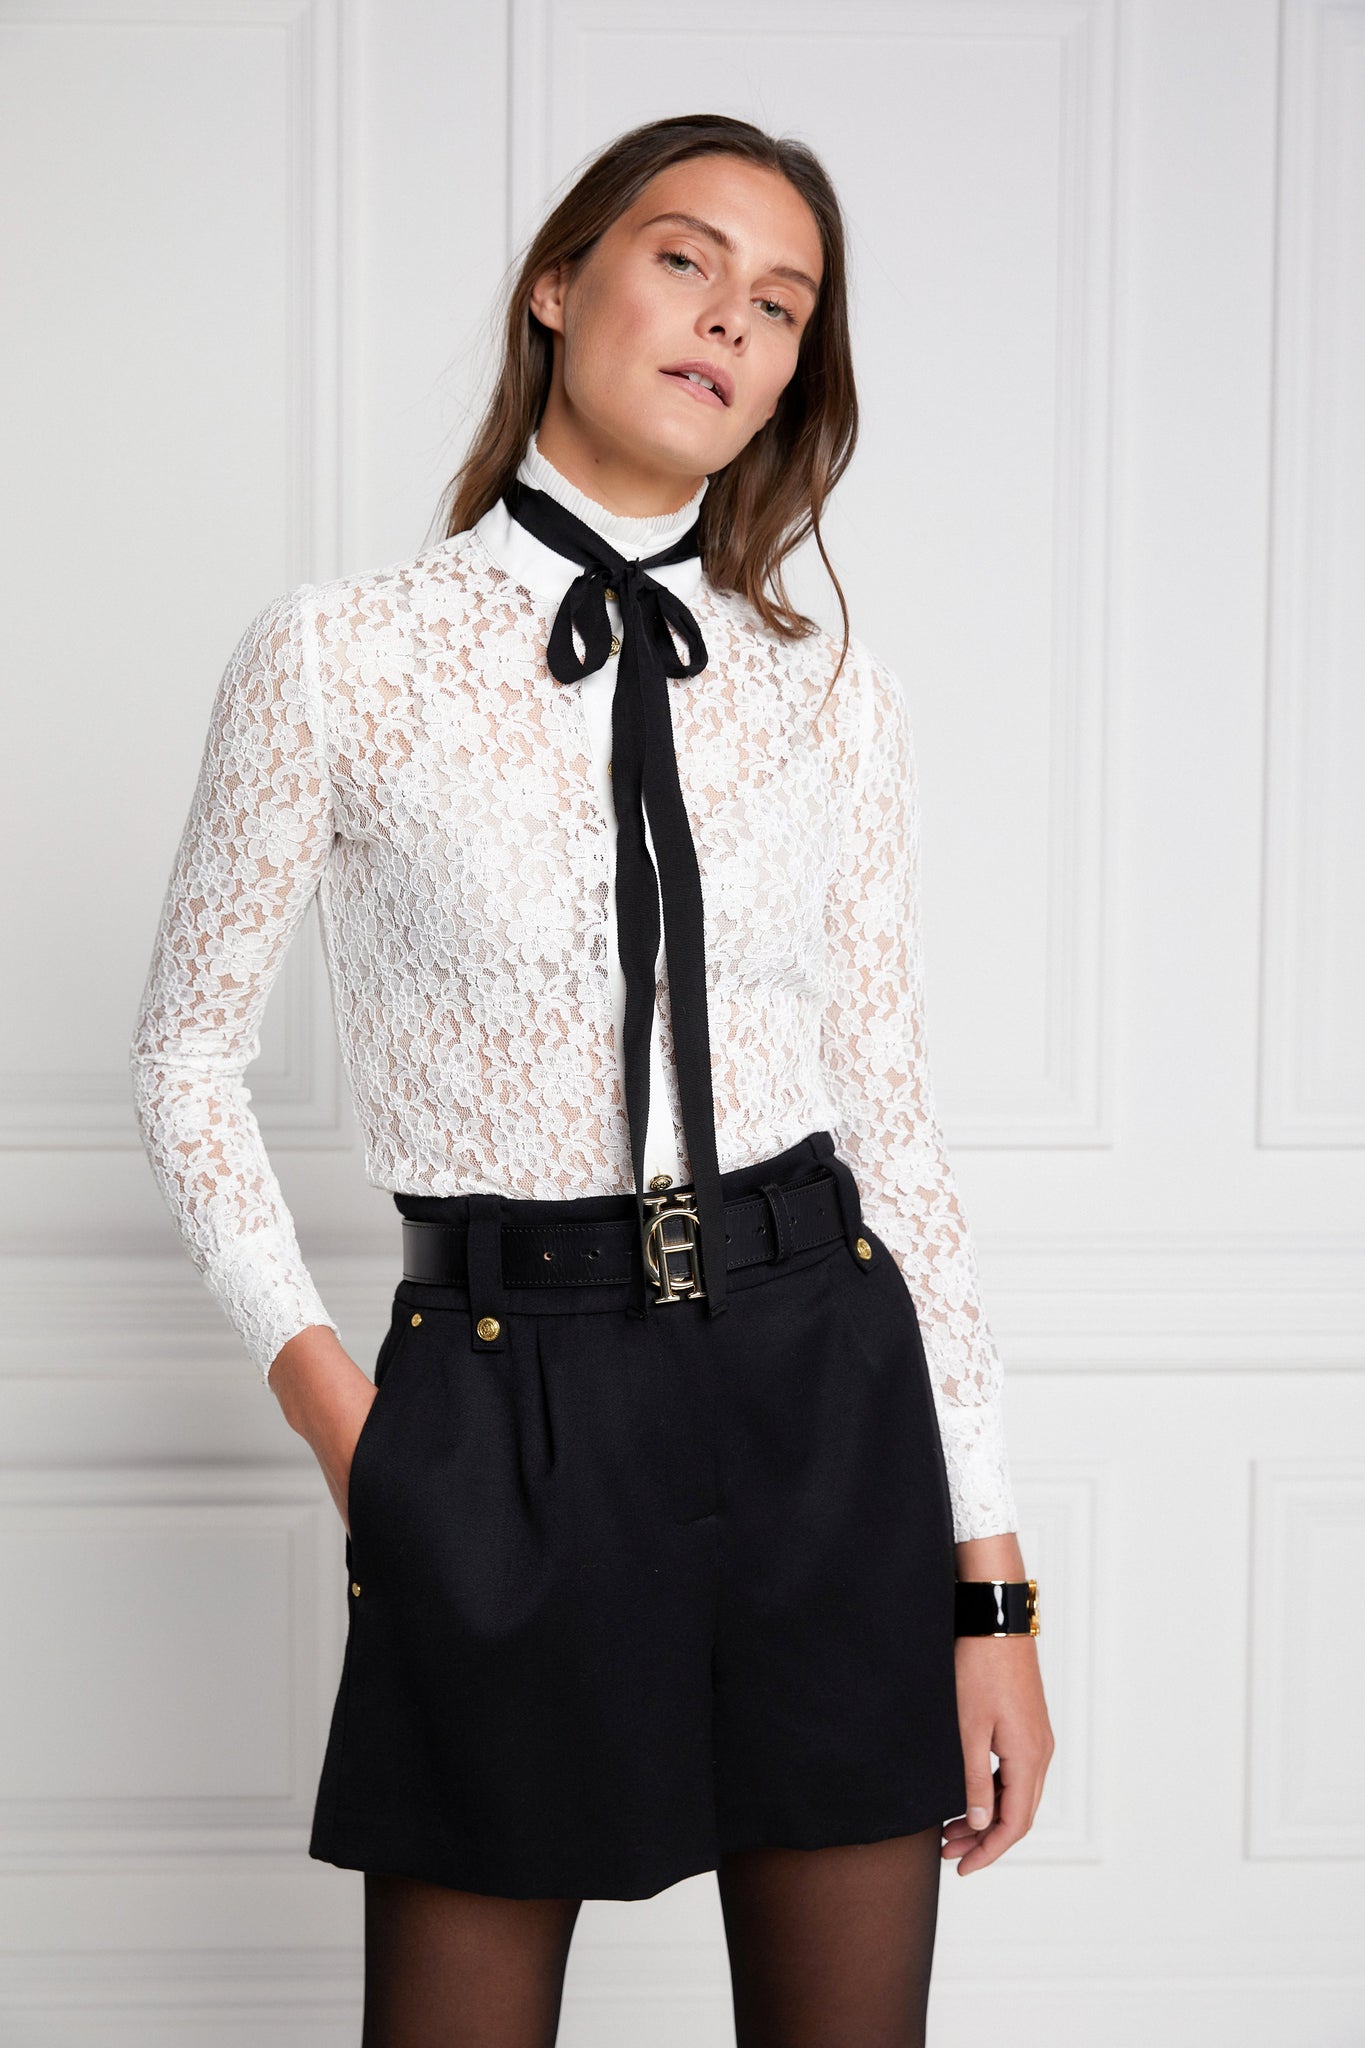 womens black high rise tailored shorts with two single knife pleats and centre front zip fly fastening with twin branded gold stud buttons and side hip pockets with branded rivet detailing at top and bottom of pockets worn with white lace shirt with black tie around collar